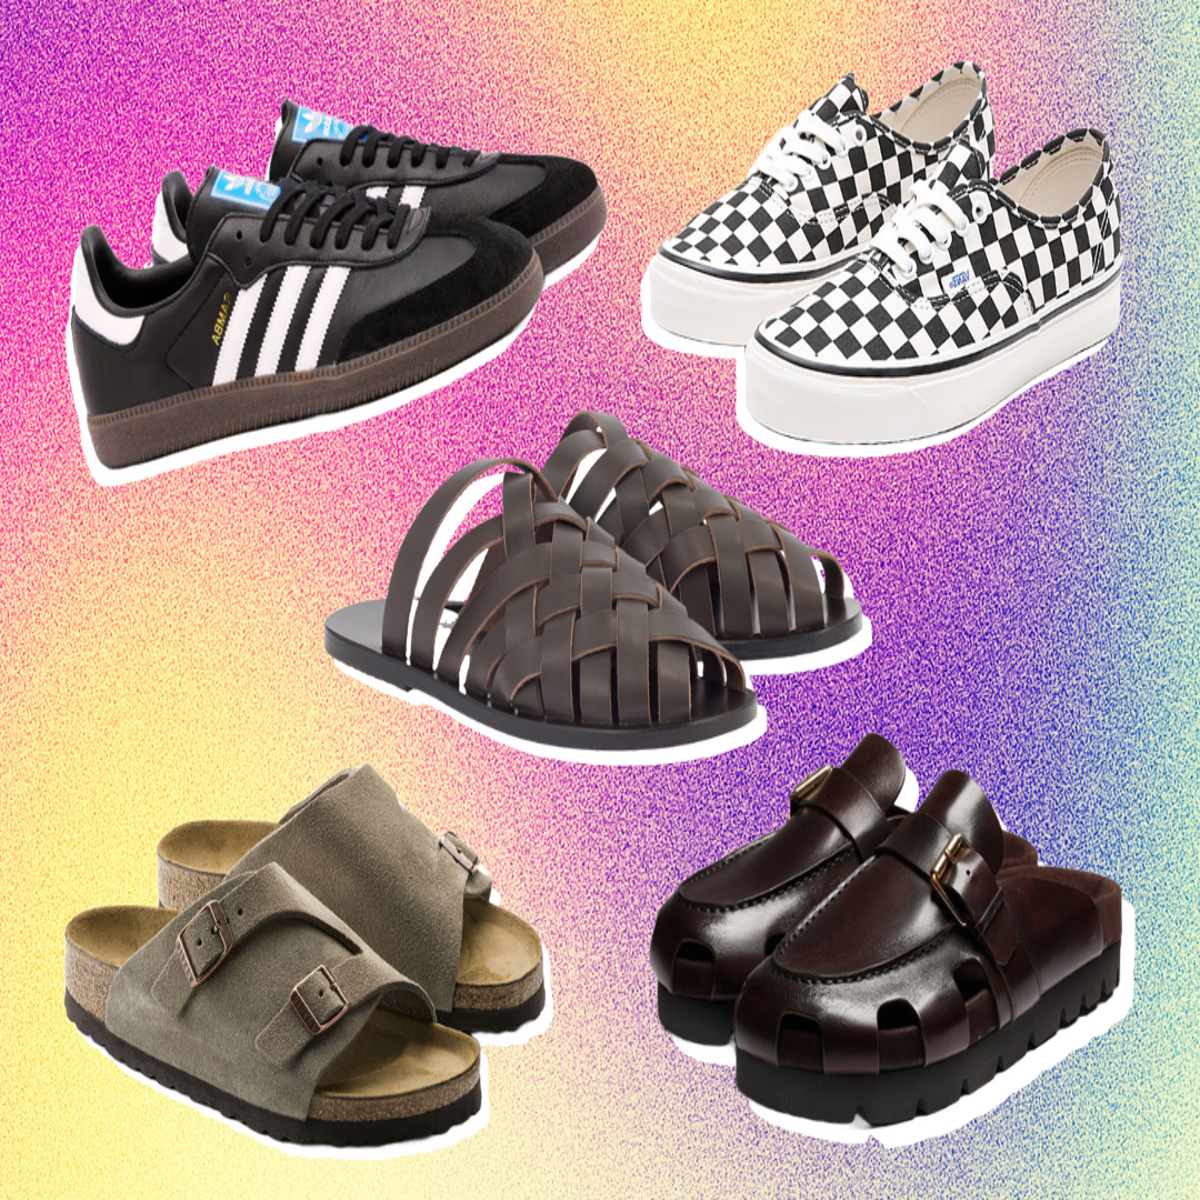 21 Best Leather Sandals for Men 2023: Slide In, Strap Up, Vibe Out